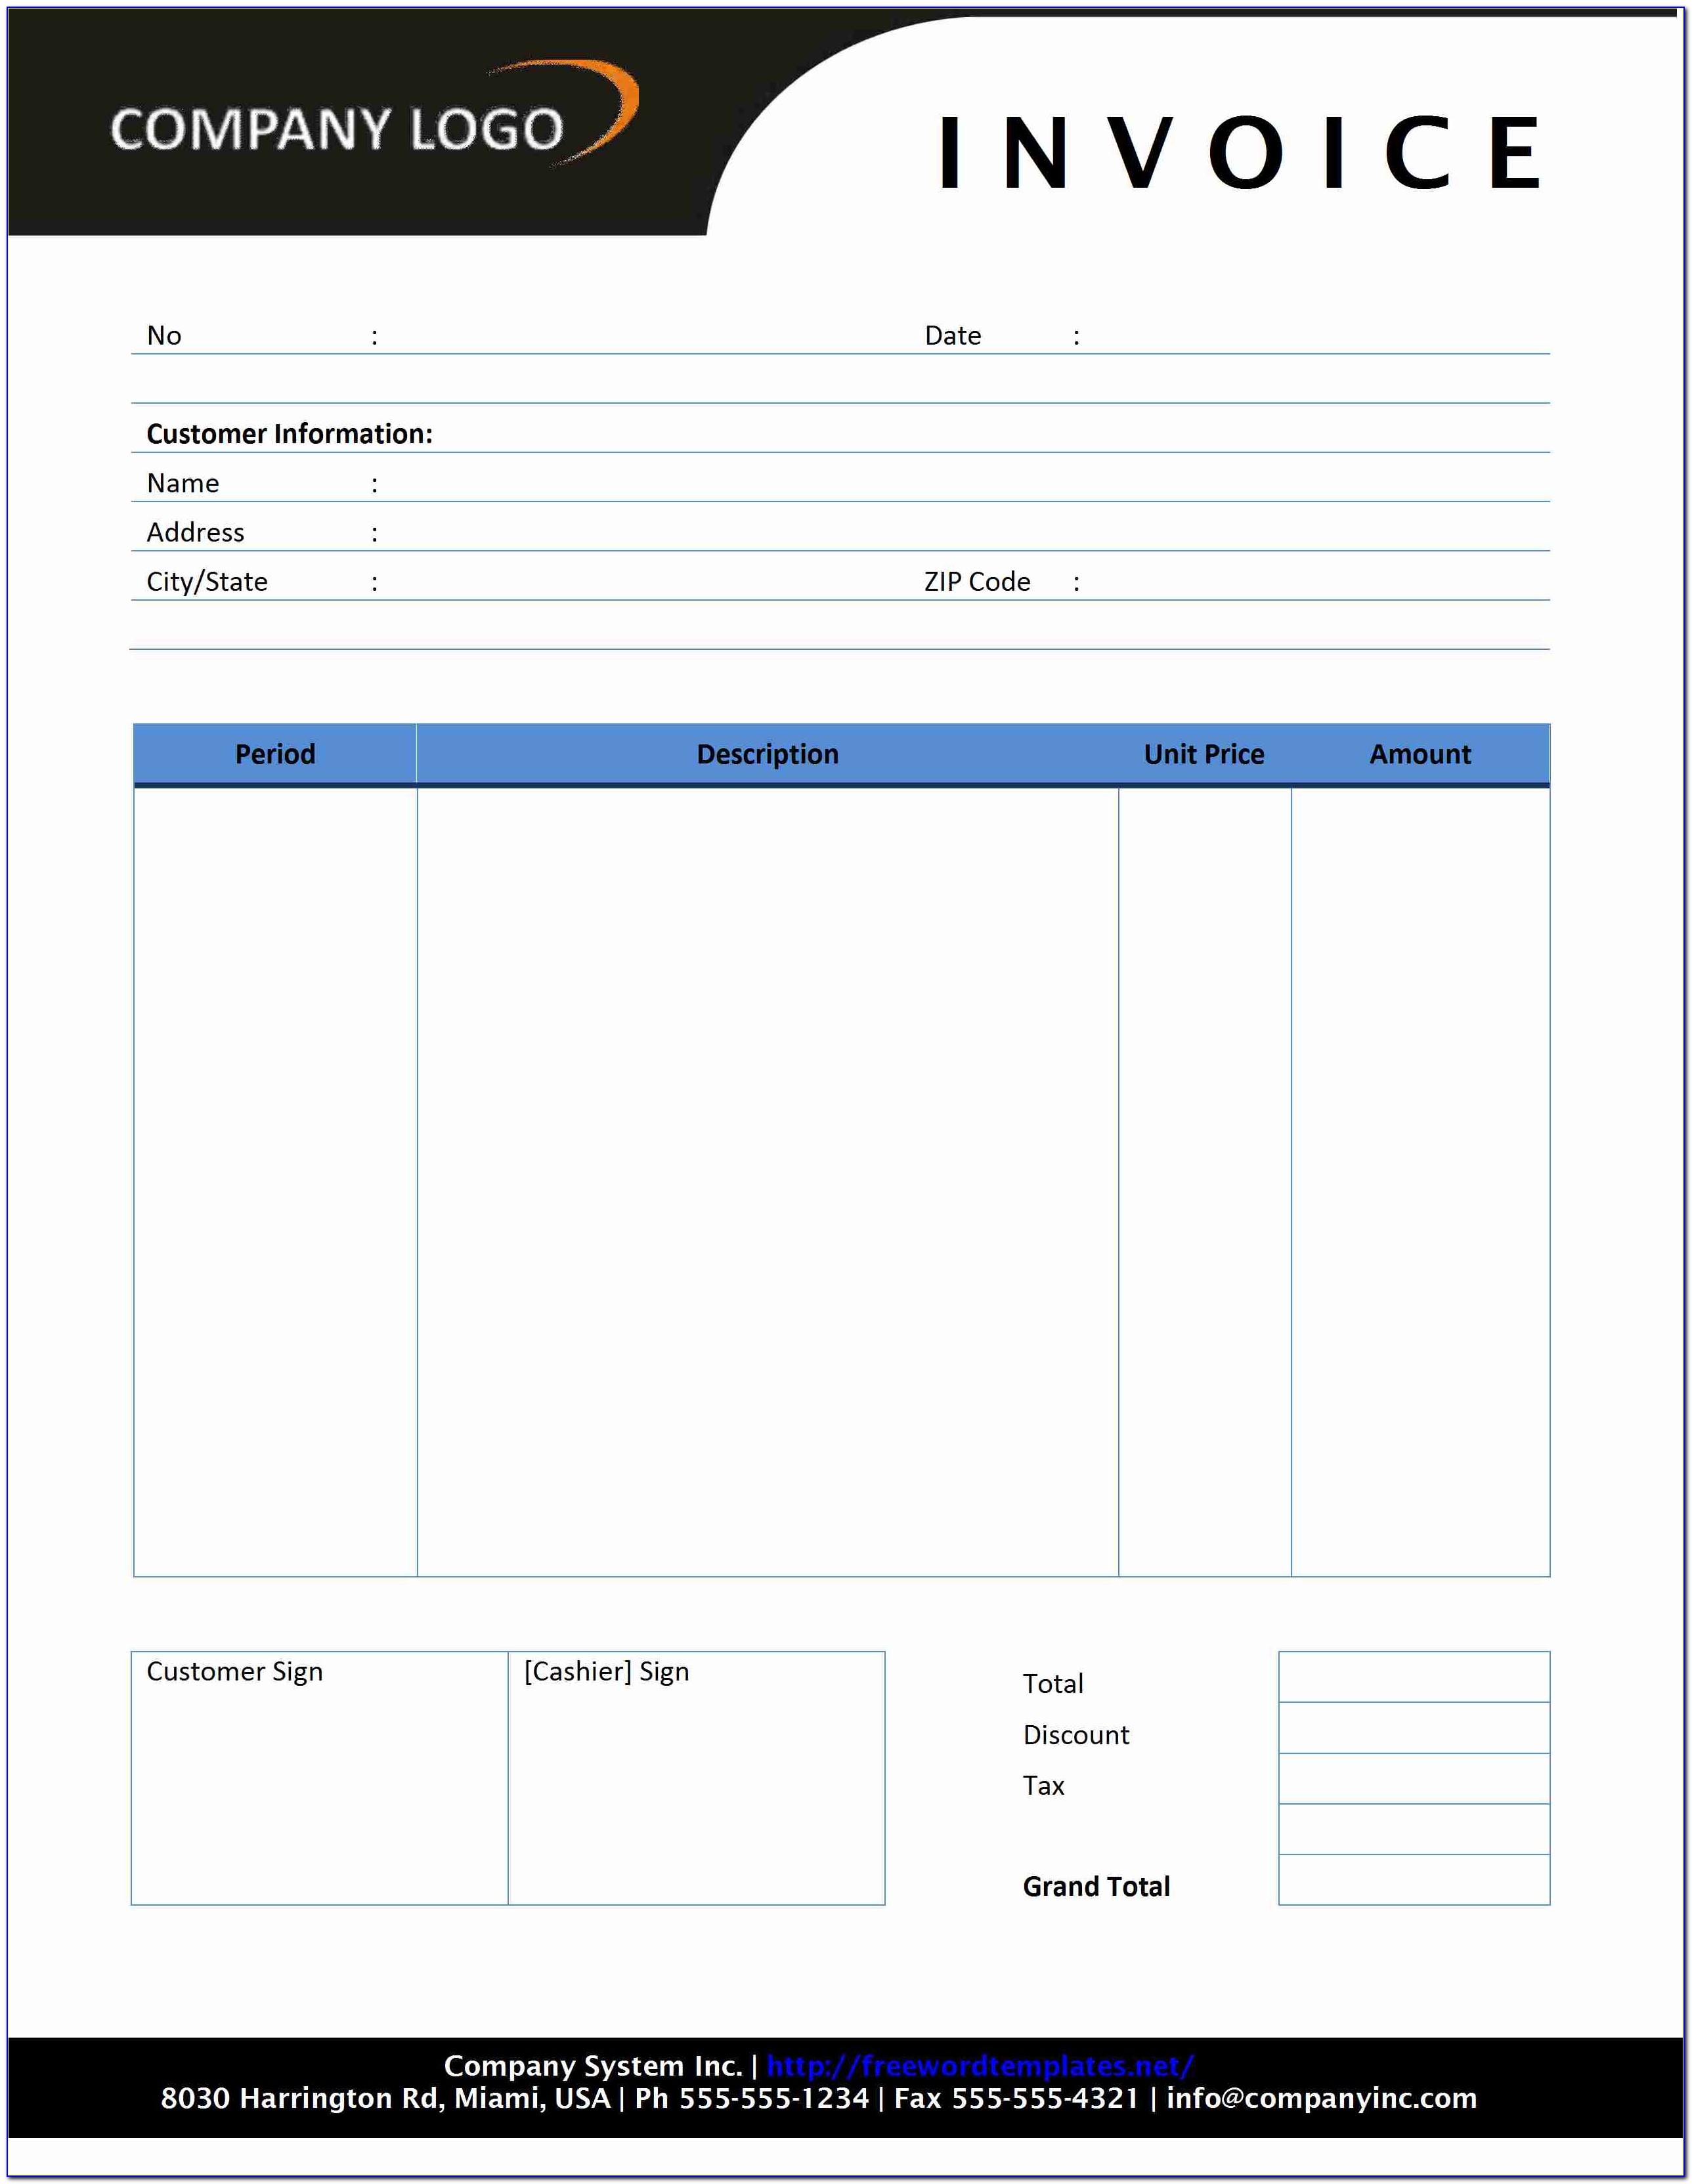 rent-invoice-form-form-resume-examples-ml52lpwkxo